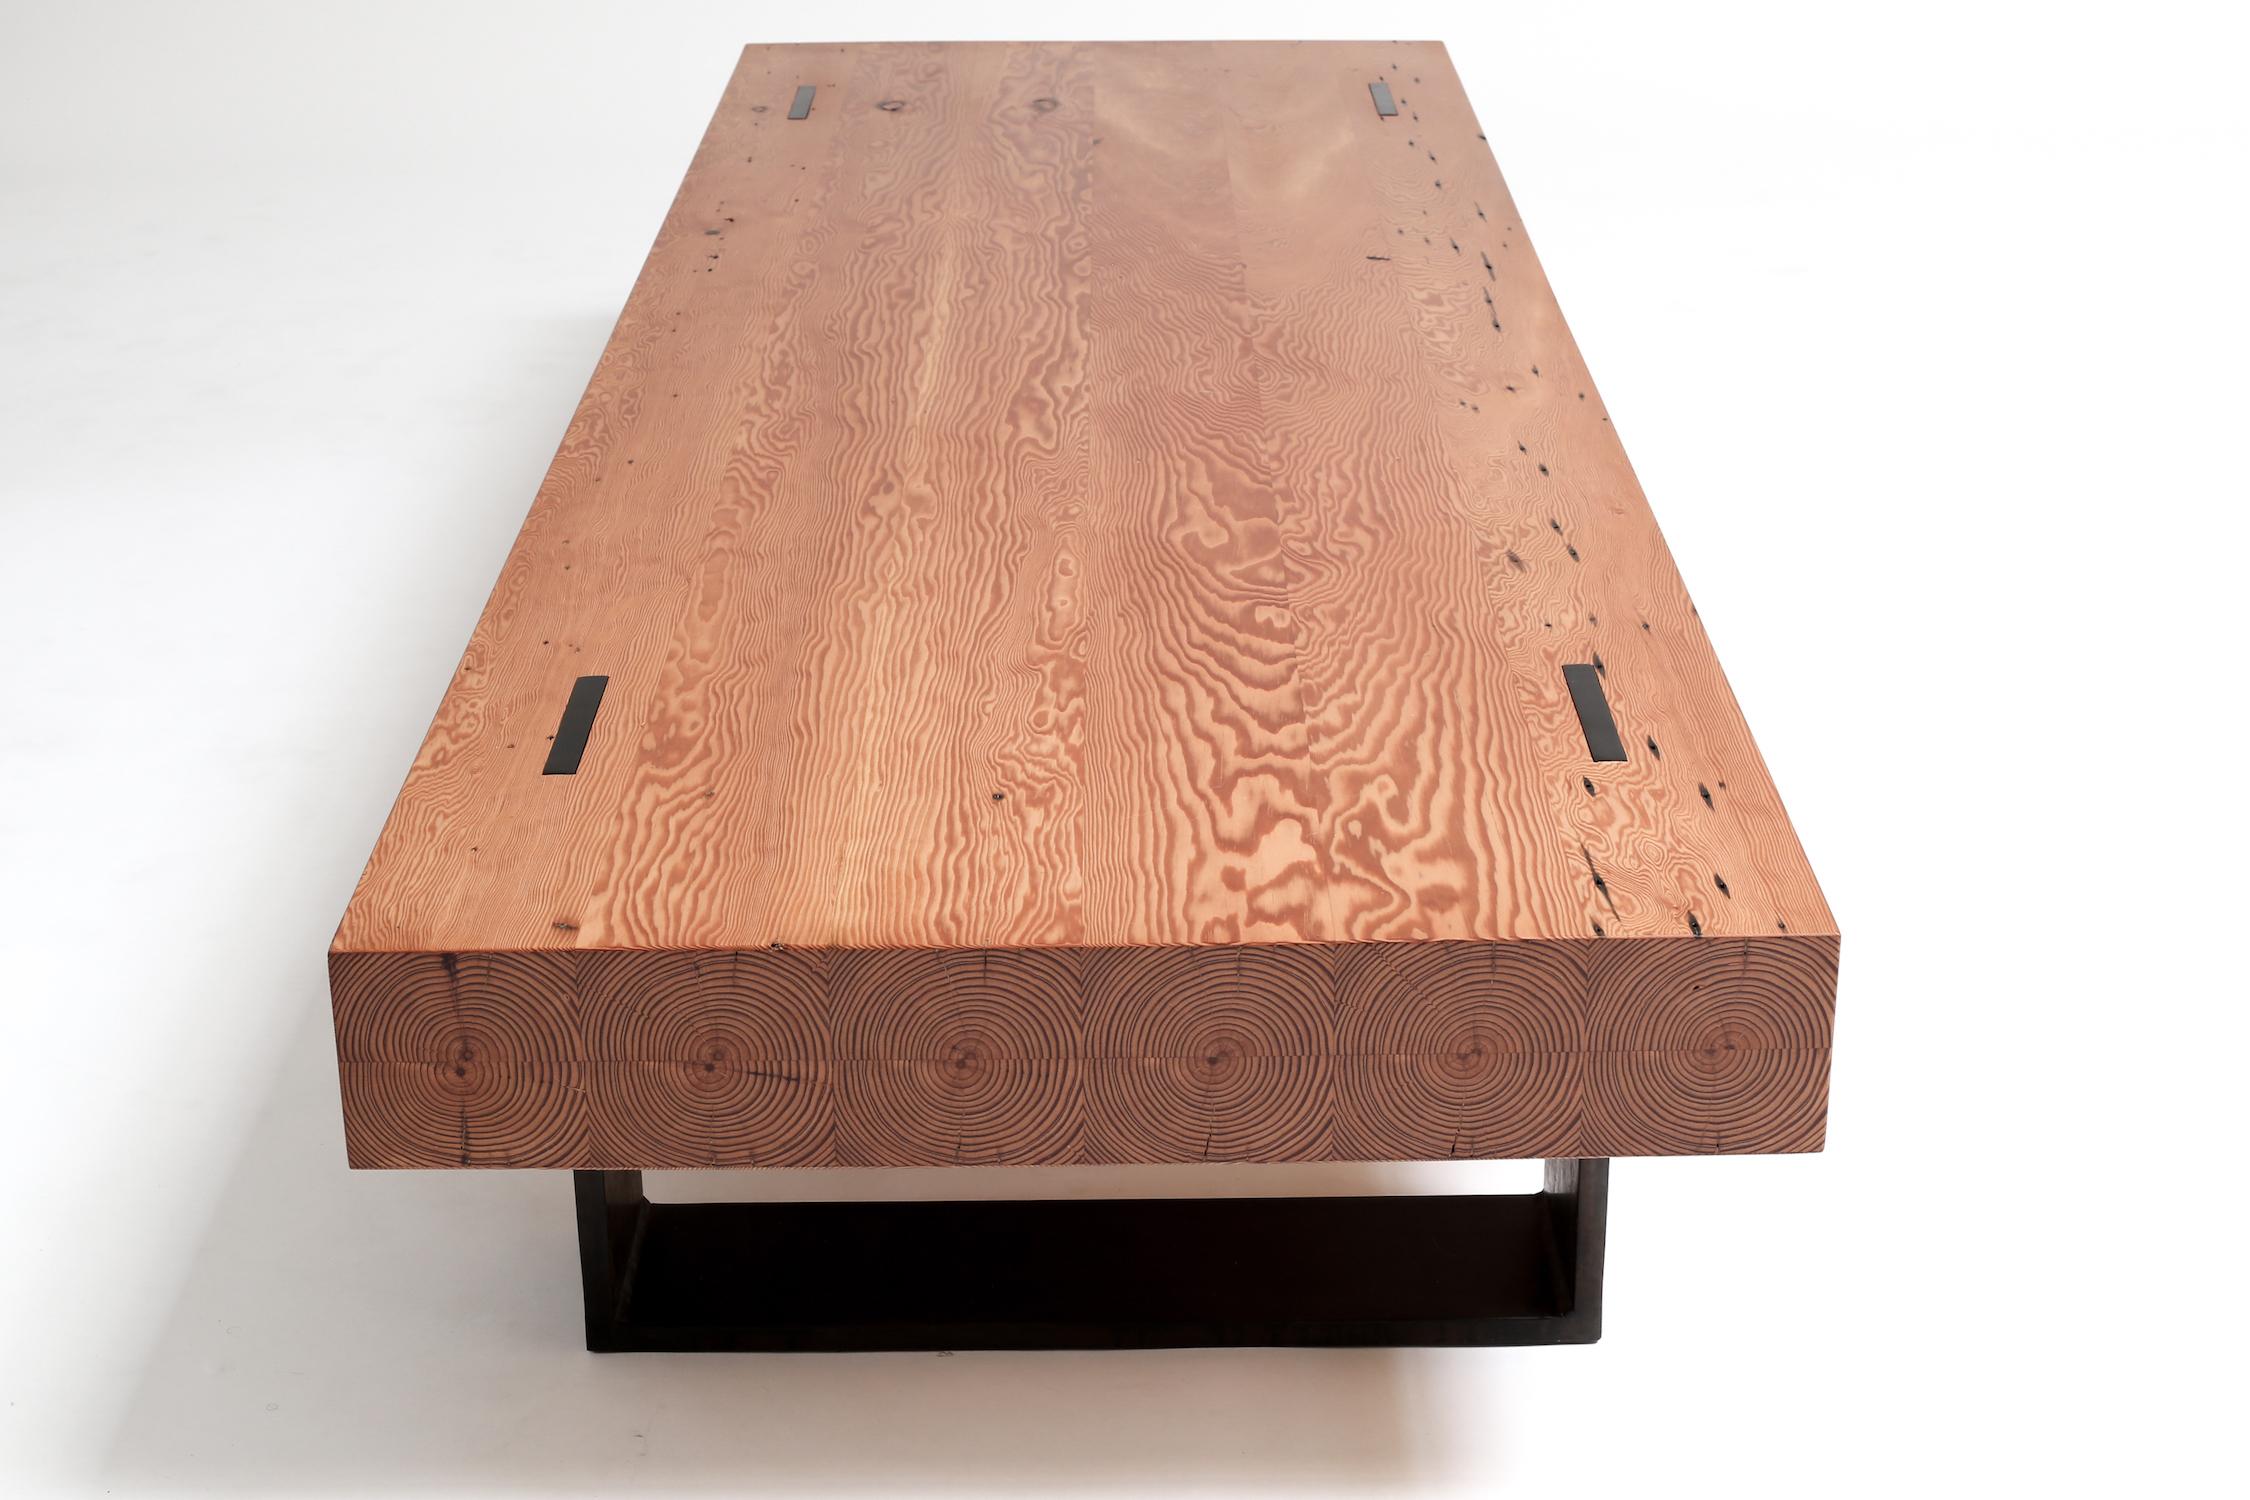 Simple forms create an elegant feel with these reclaimed joists that are supported by a 3/4” thick steel base. Salvaged joists are machined to mimic solid timber, creating a shell that appears to be composed of six square beams. This coffee table